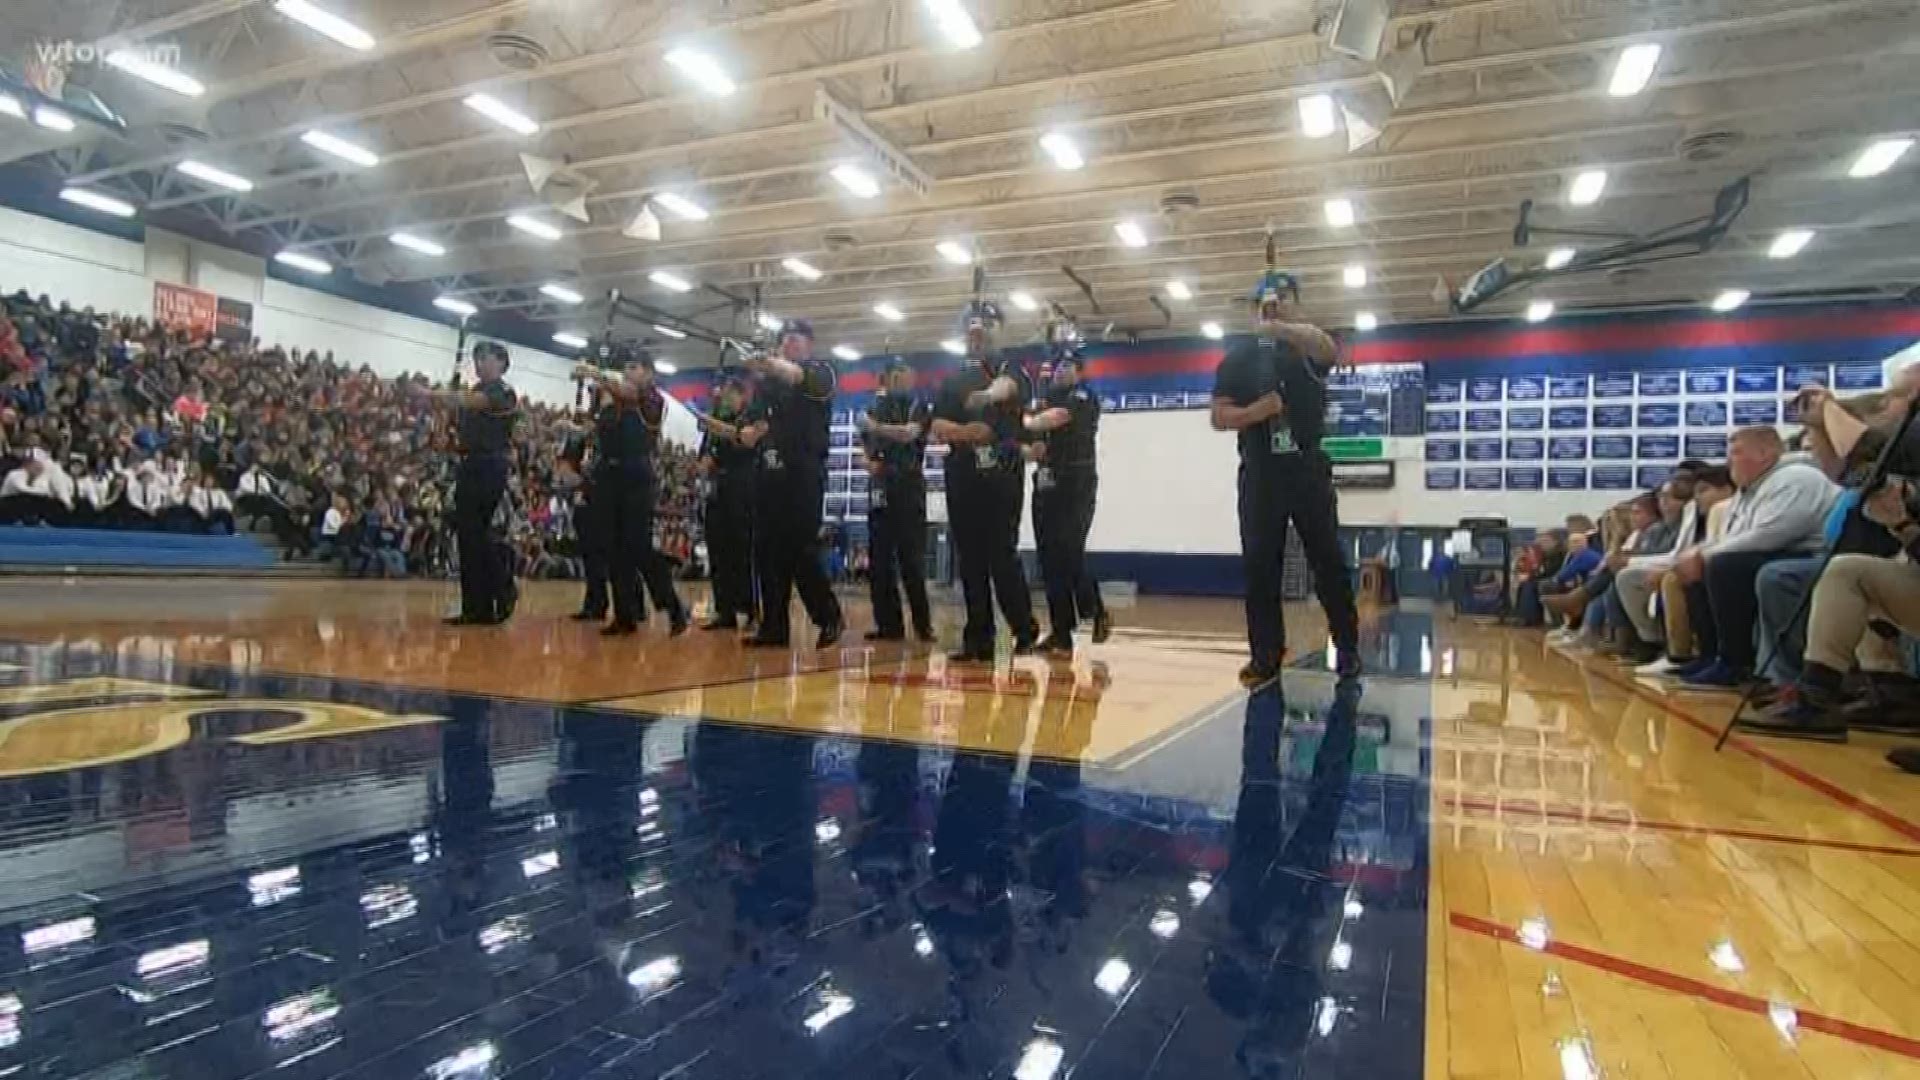 The annual assembly features a performance from the JROTC drill team.